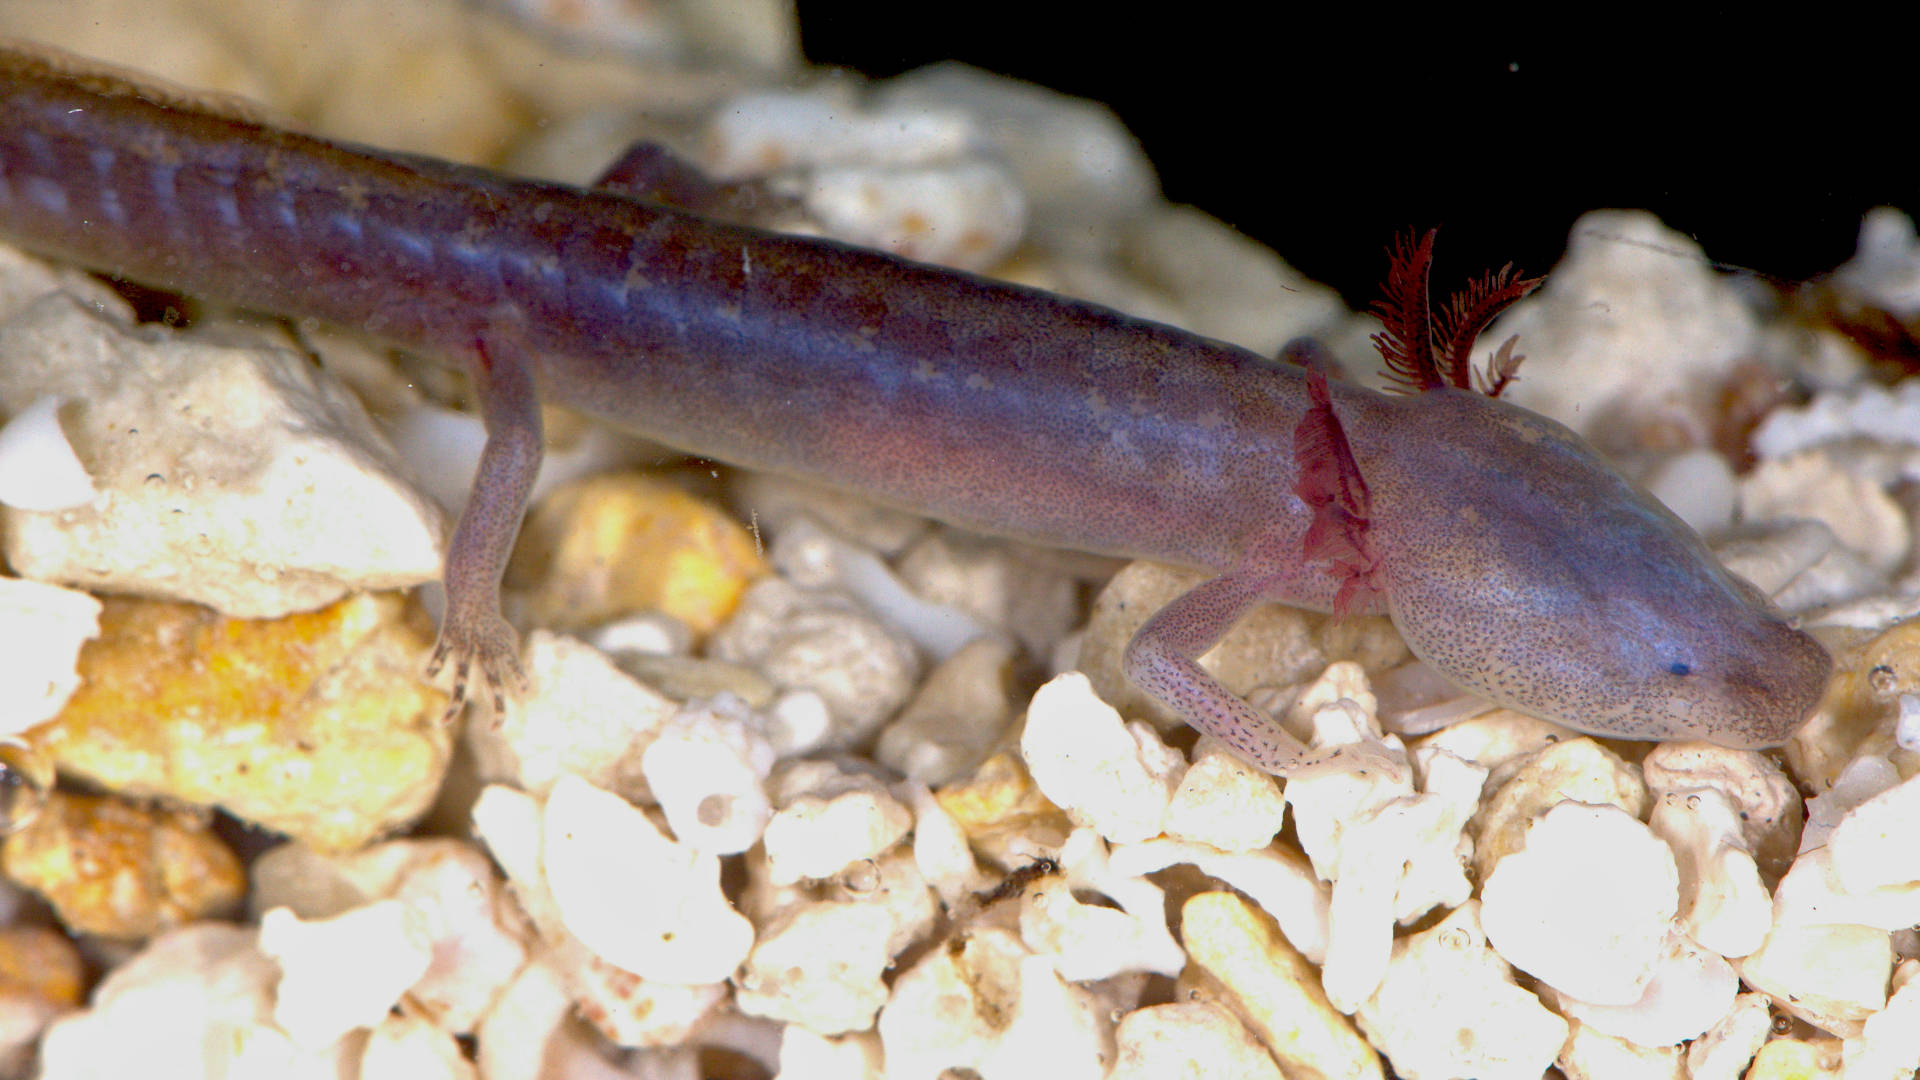 A captive Austin blind salamander. This species' only known habitat is the subterranean waters of Barton Springs in Austin, Texas.